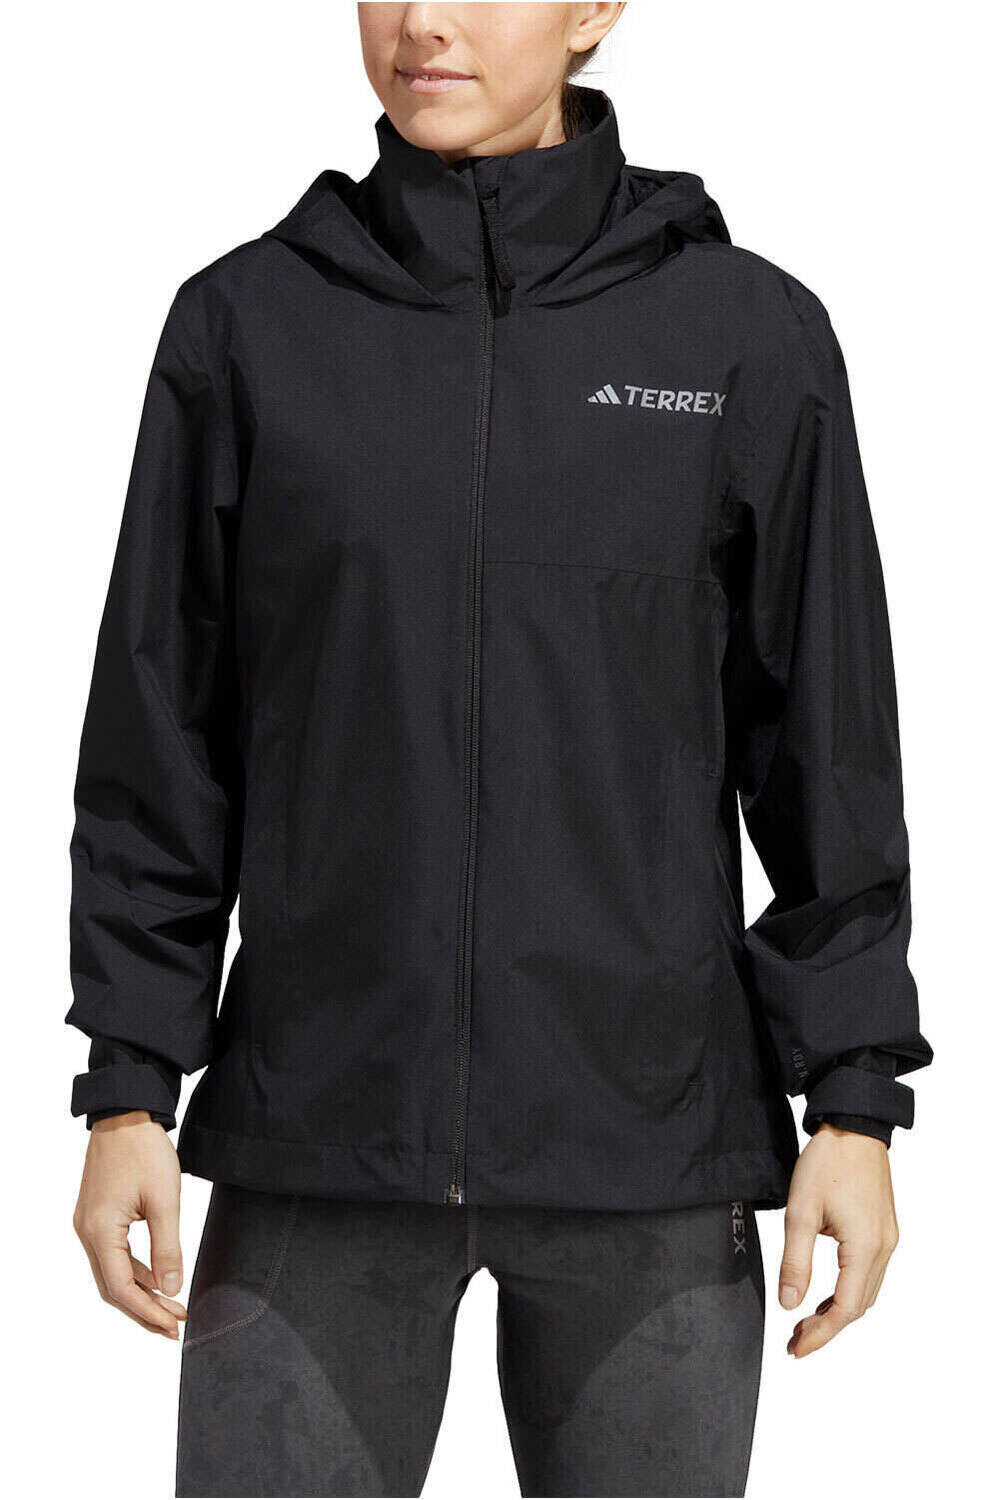 adidas chaqueta impermeable mujer Terrex Multi RAIN.RDY 2-Layer impermeable vista frontal